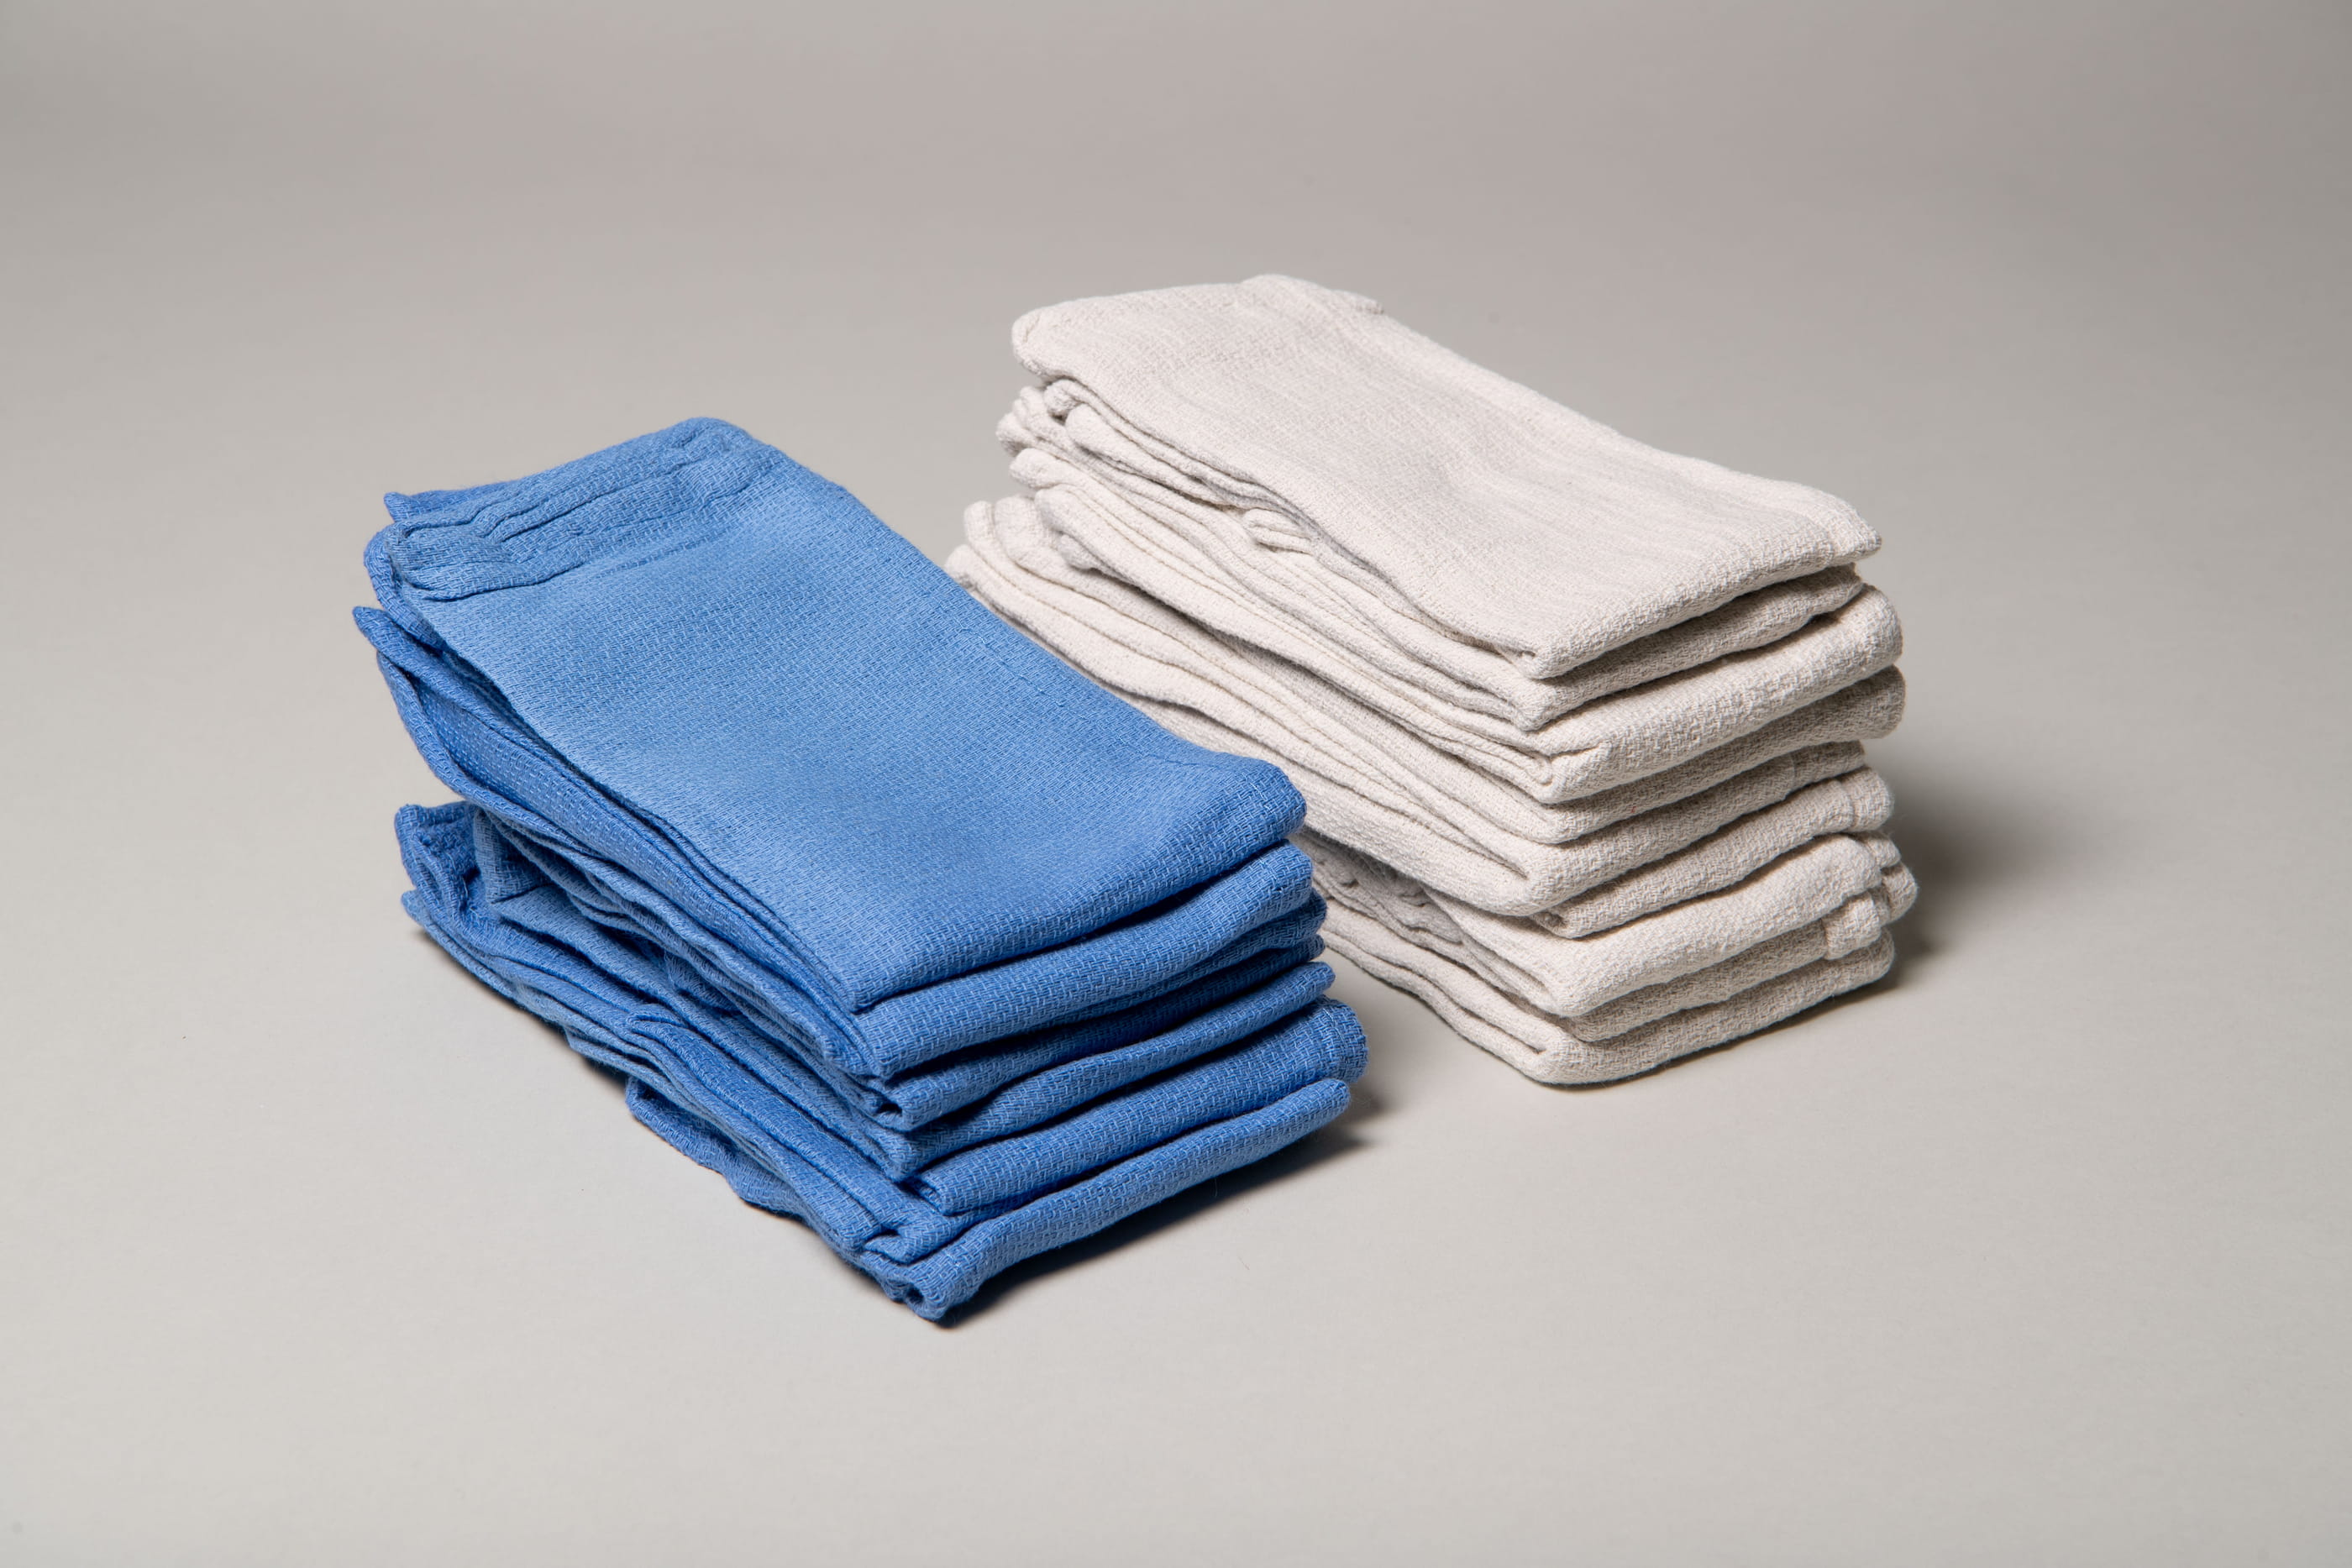 https://www.textilewastesupply.com/products/rags-and-wiping-products/img/new-huck-towels-159-lg.jpg